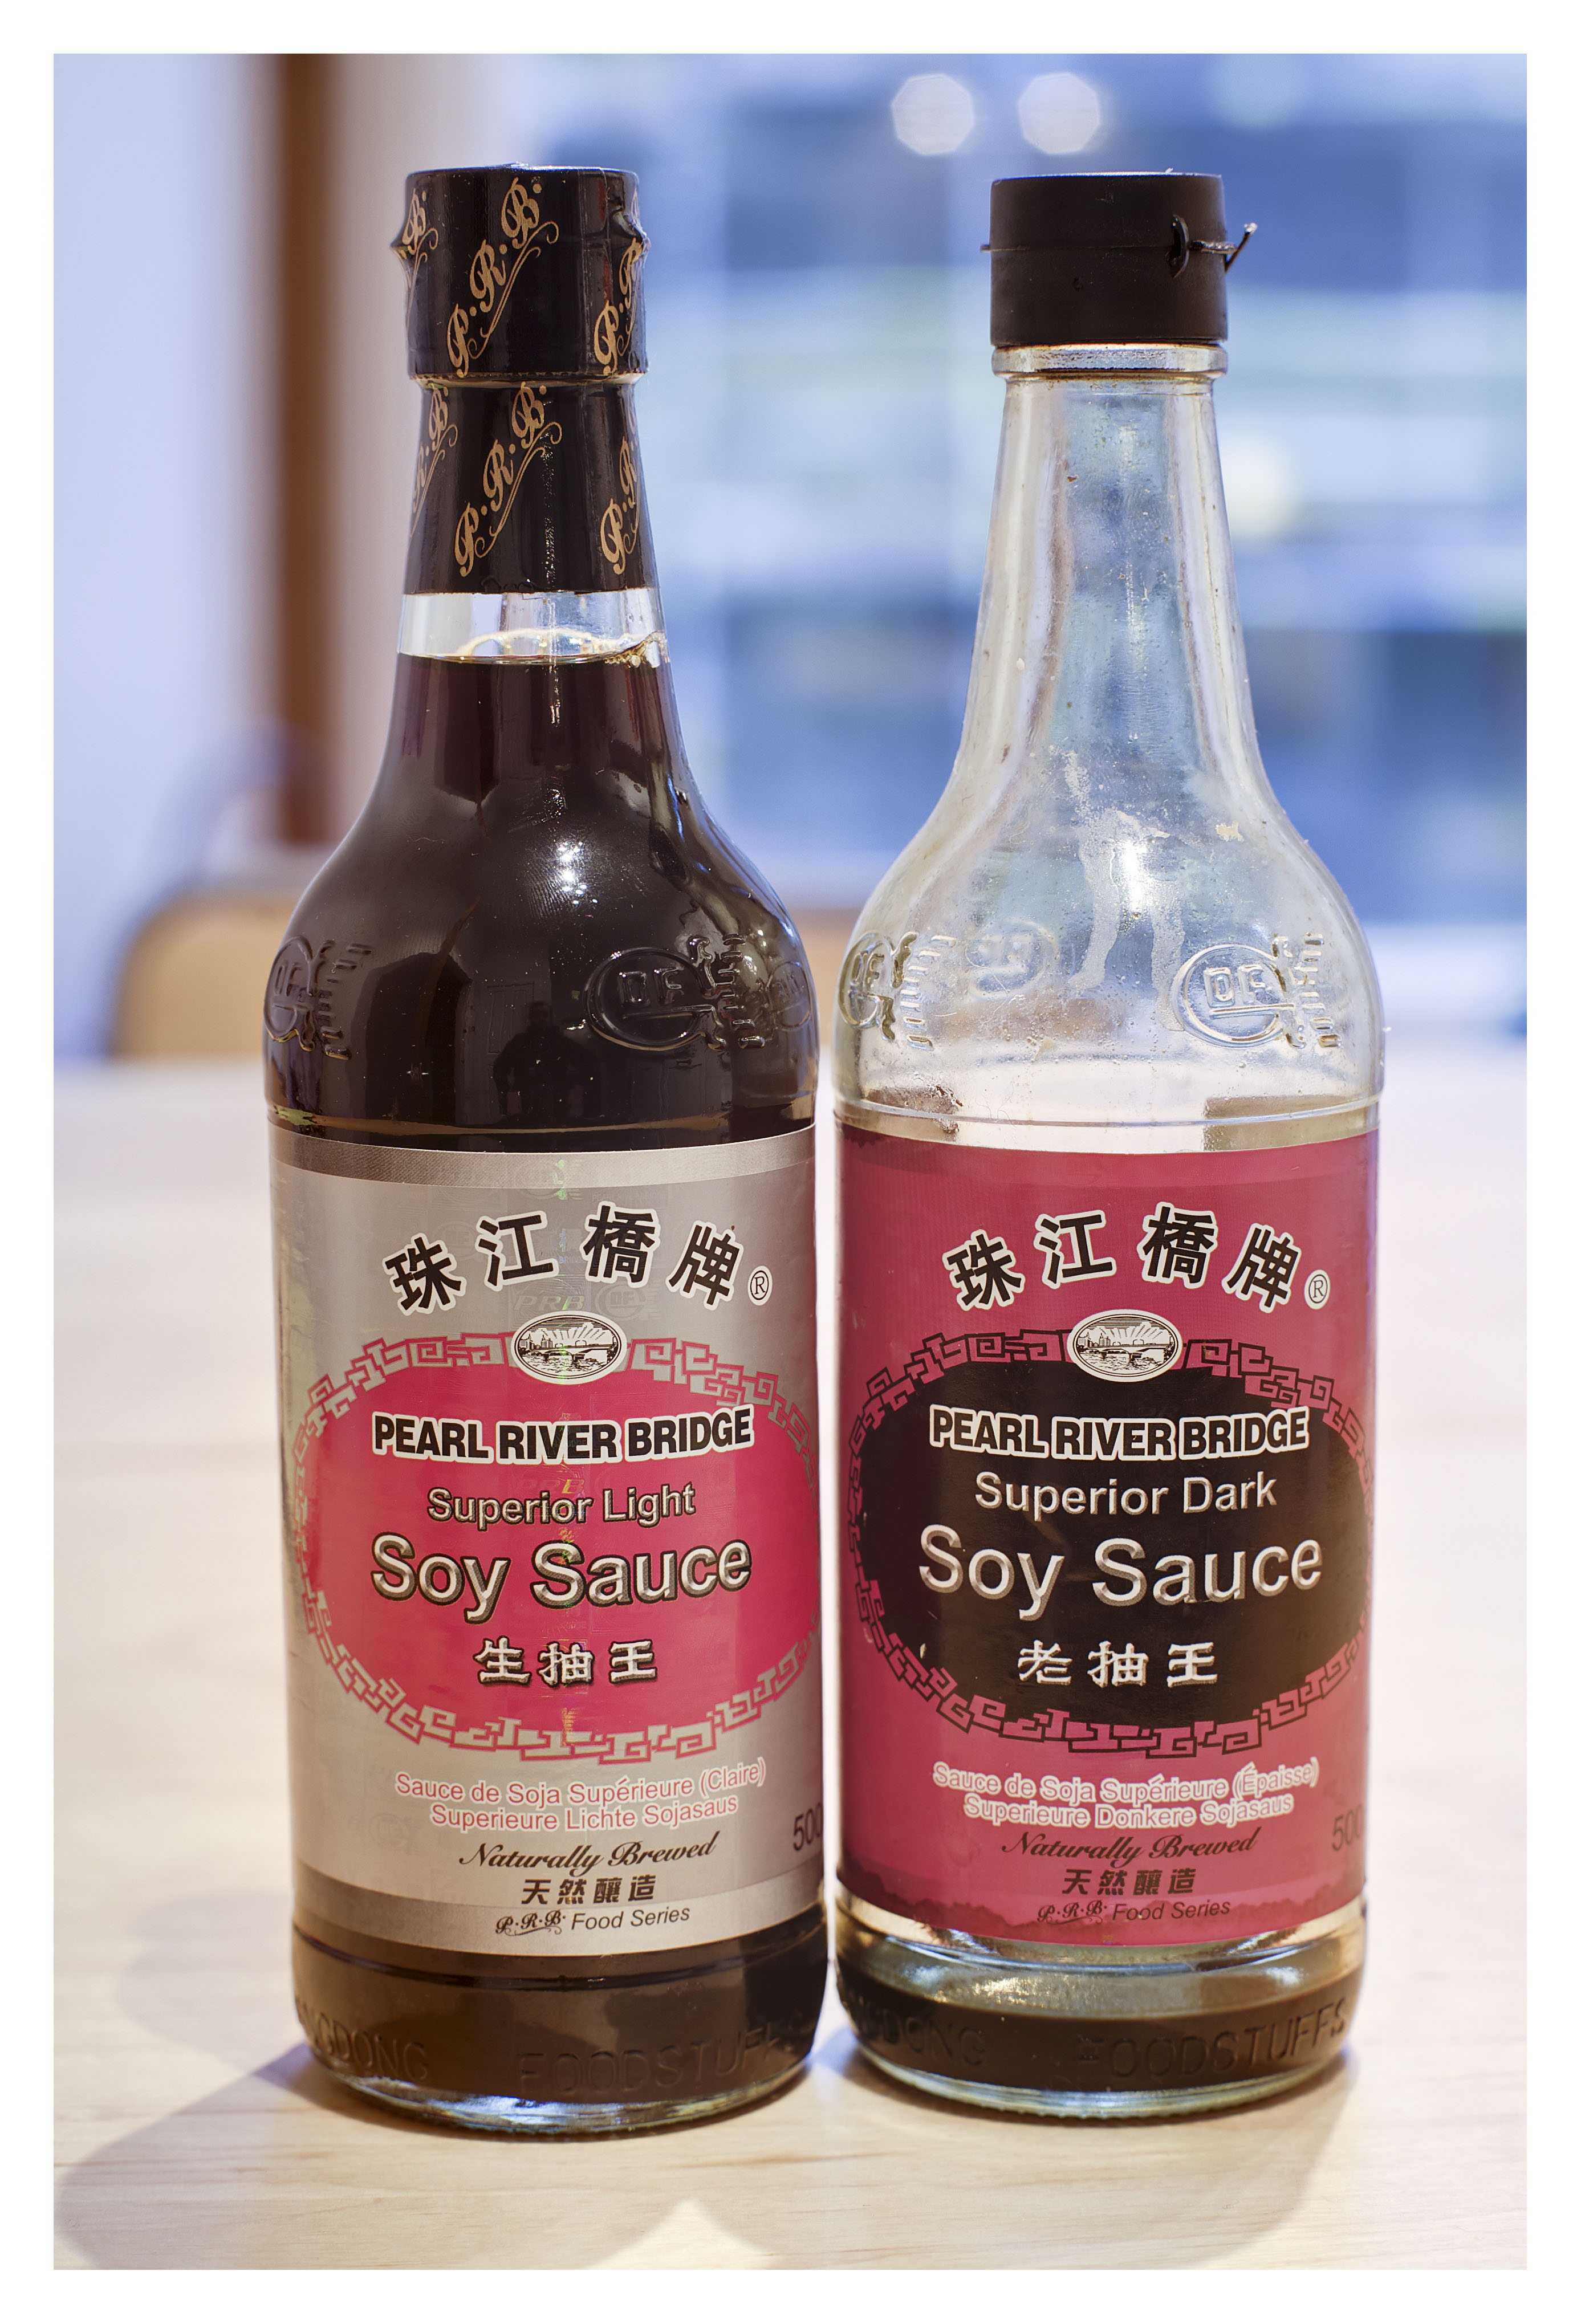 What is soya sauce?